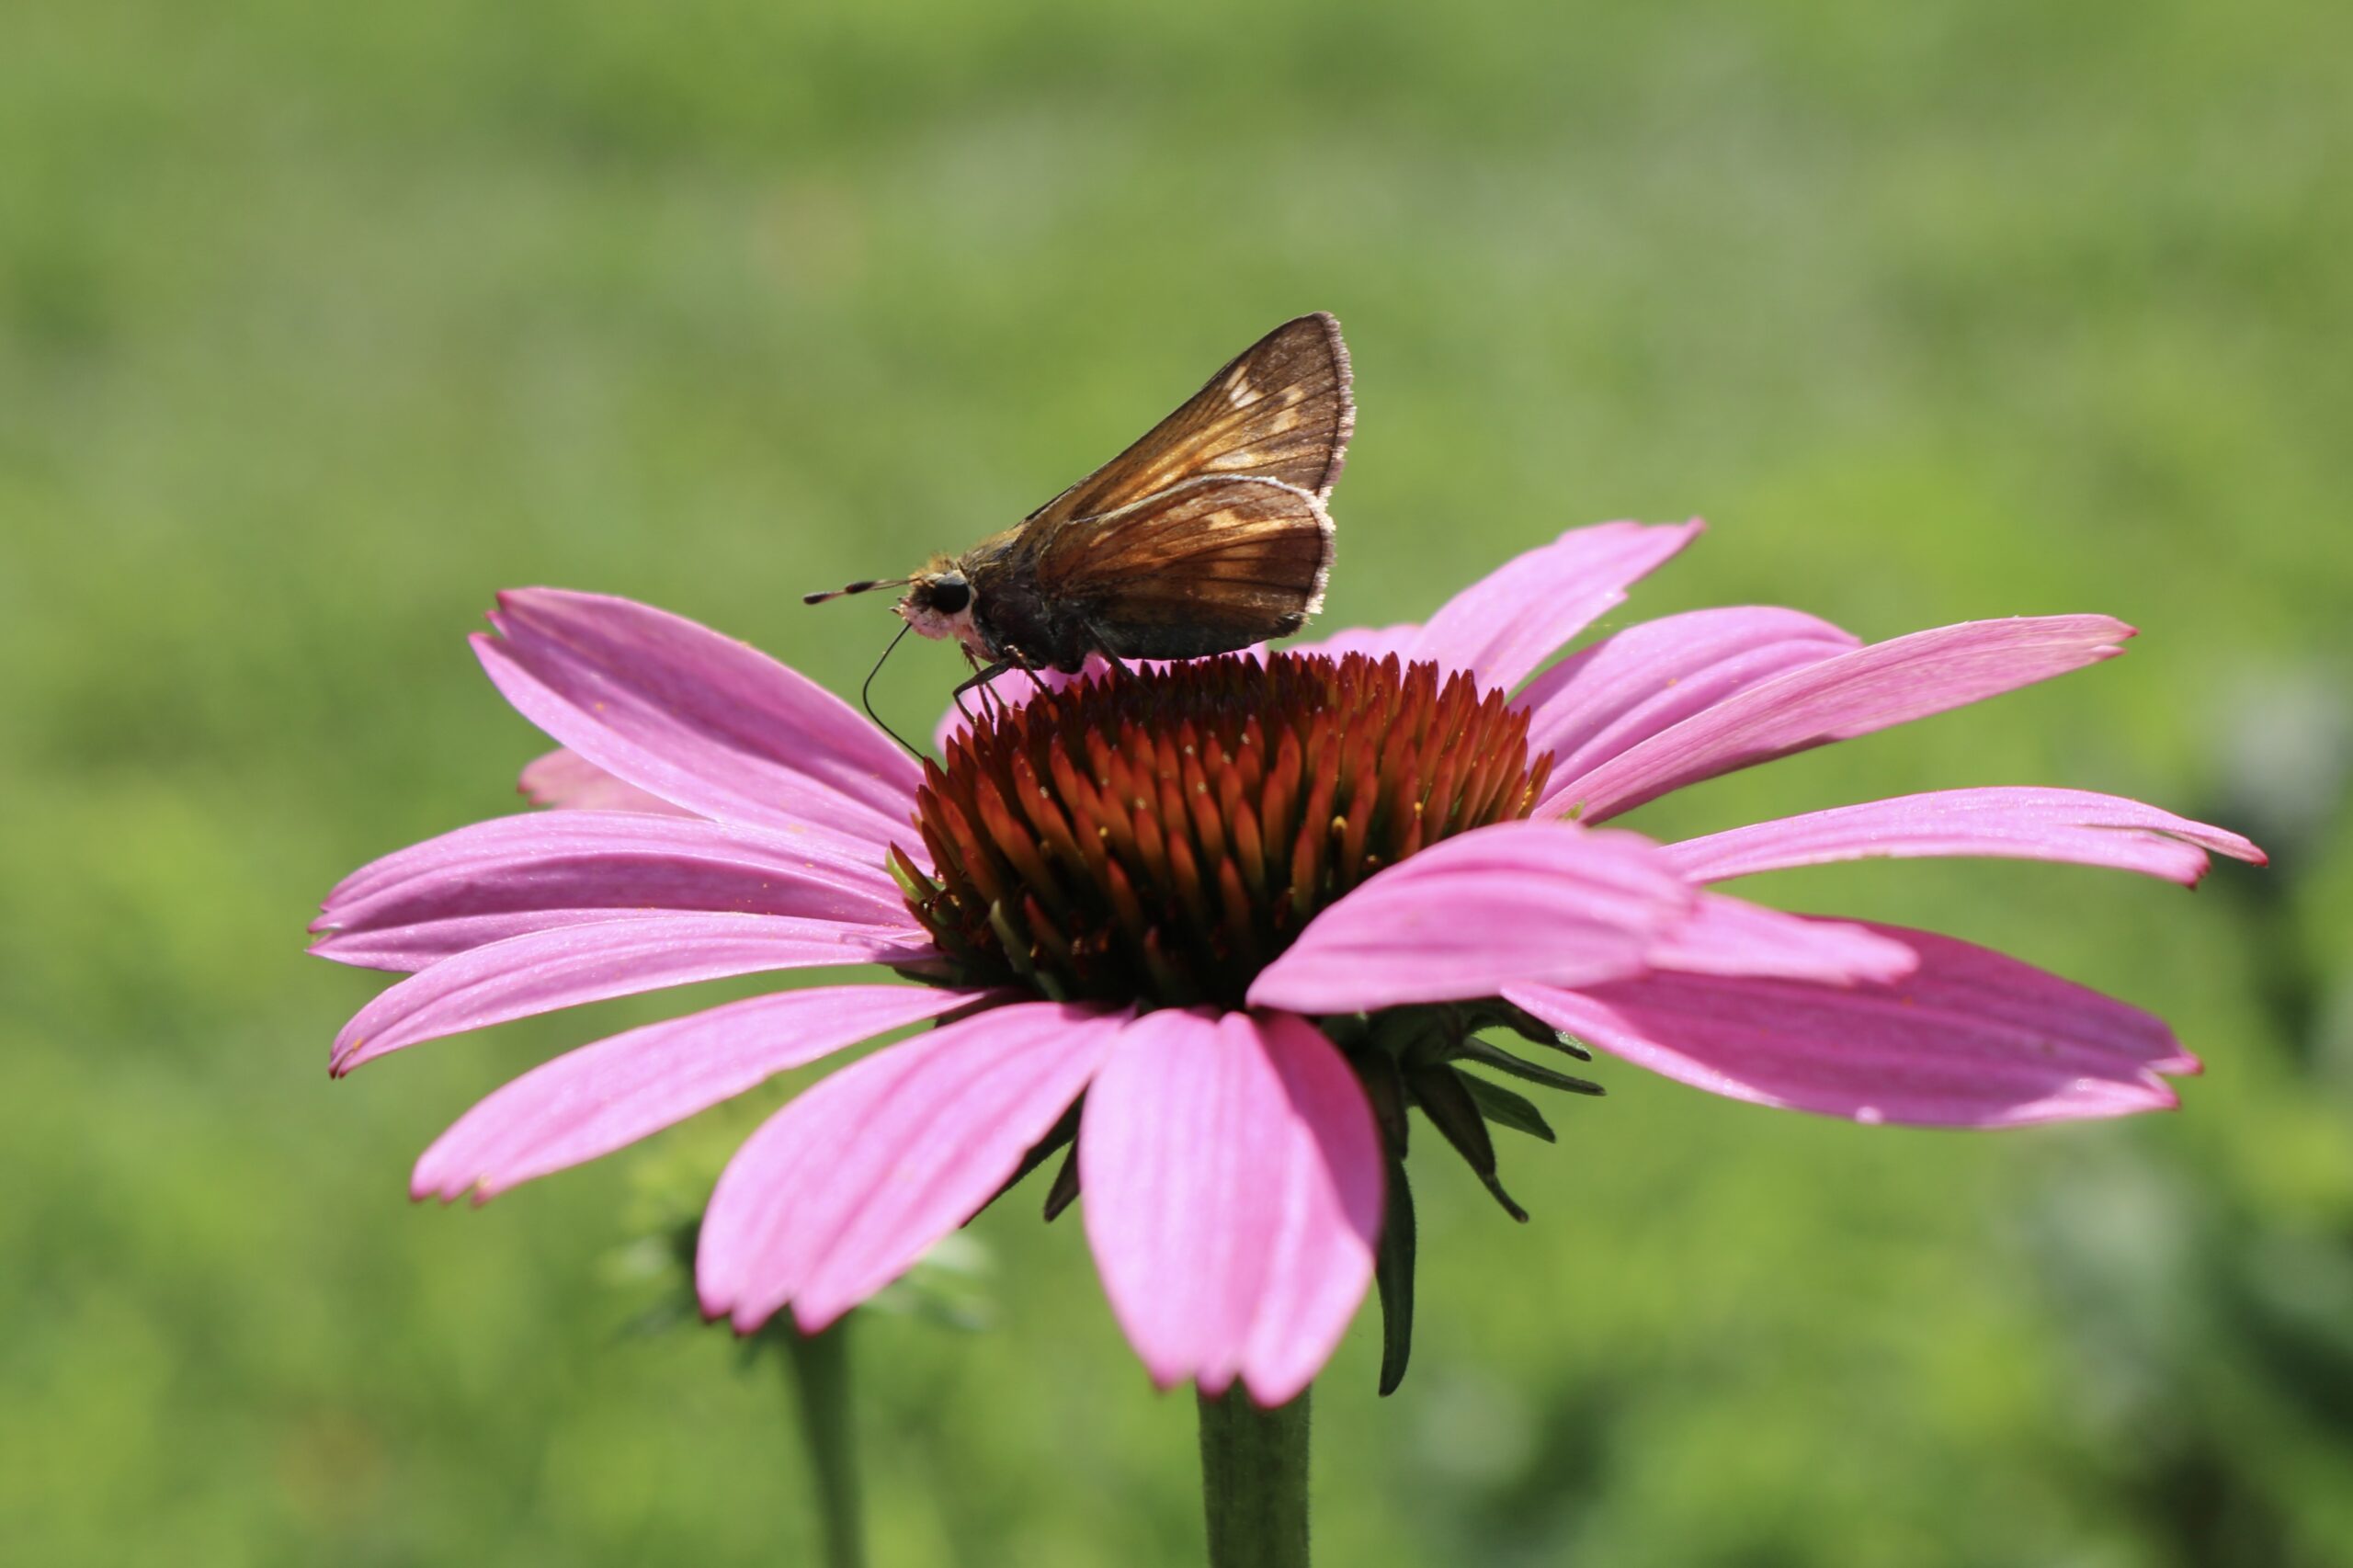 a small brown butterfly sitting on top of a pink flower